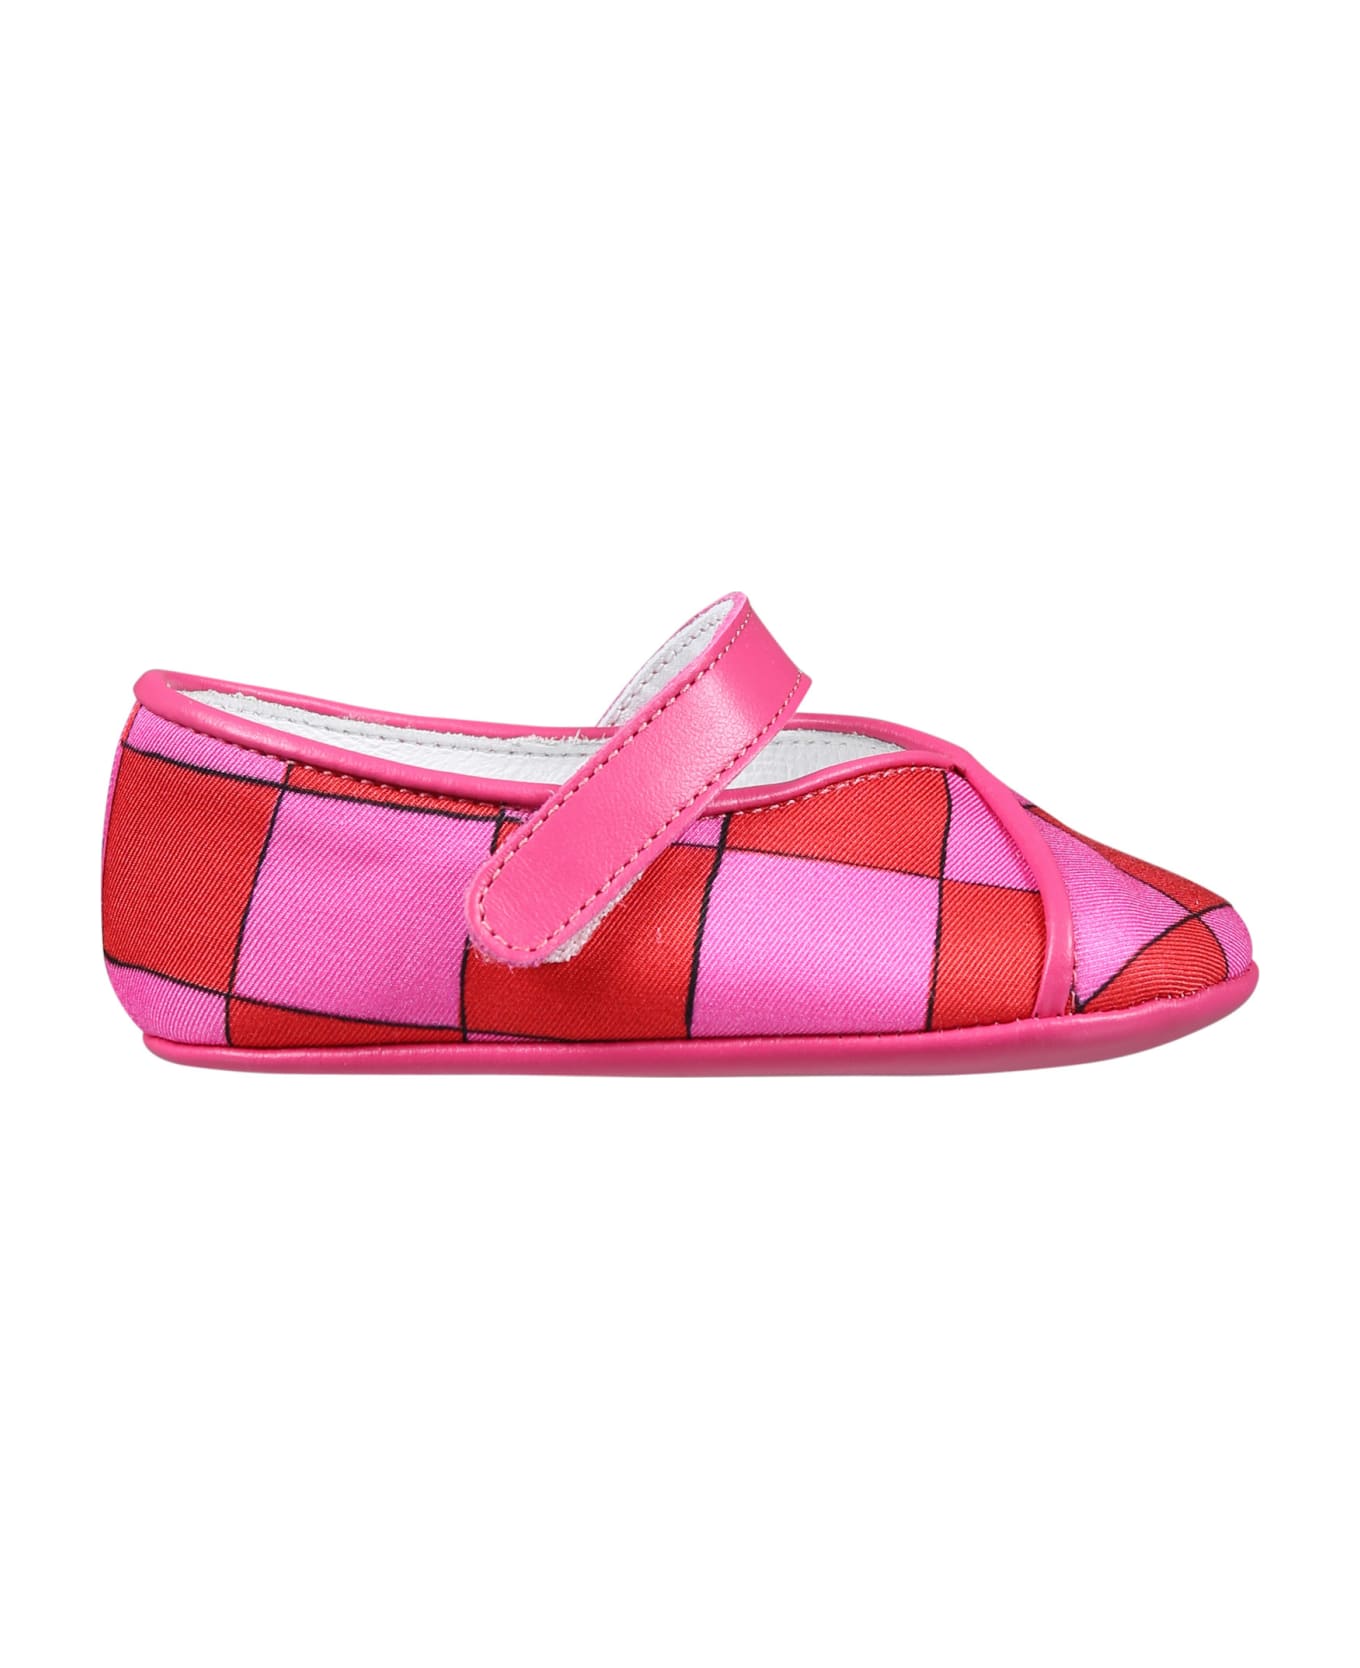 Pucci Multicolor Ballet Flats For Baby Girl With Iconic Multicolor Print - Multicolor シューズ